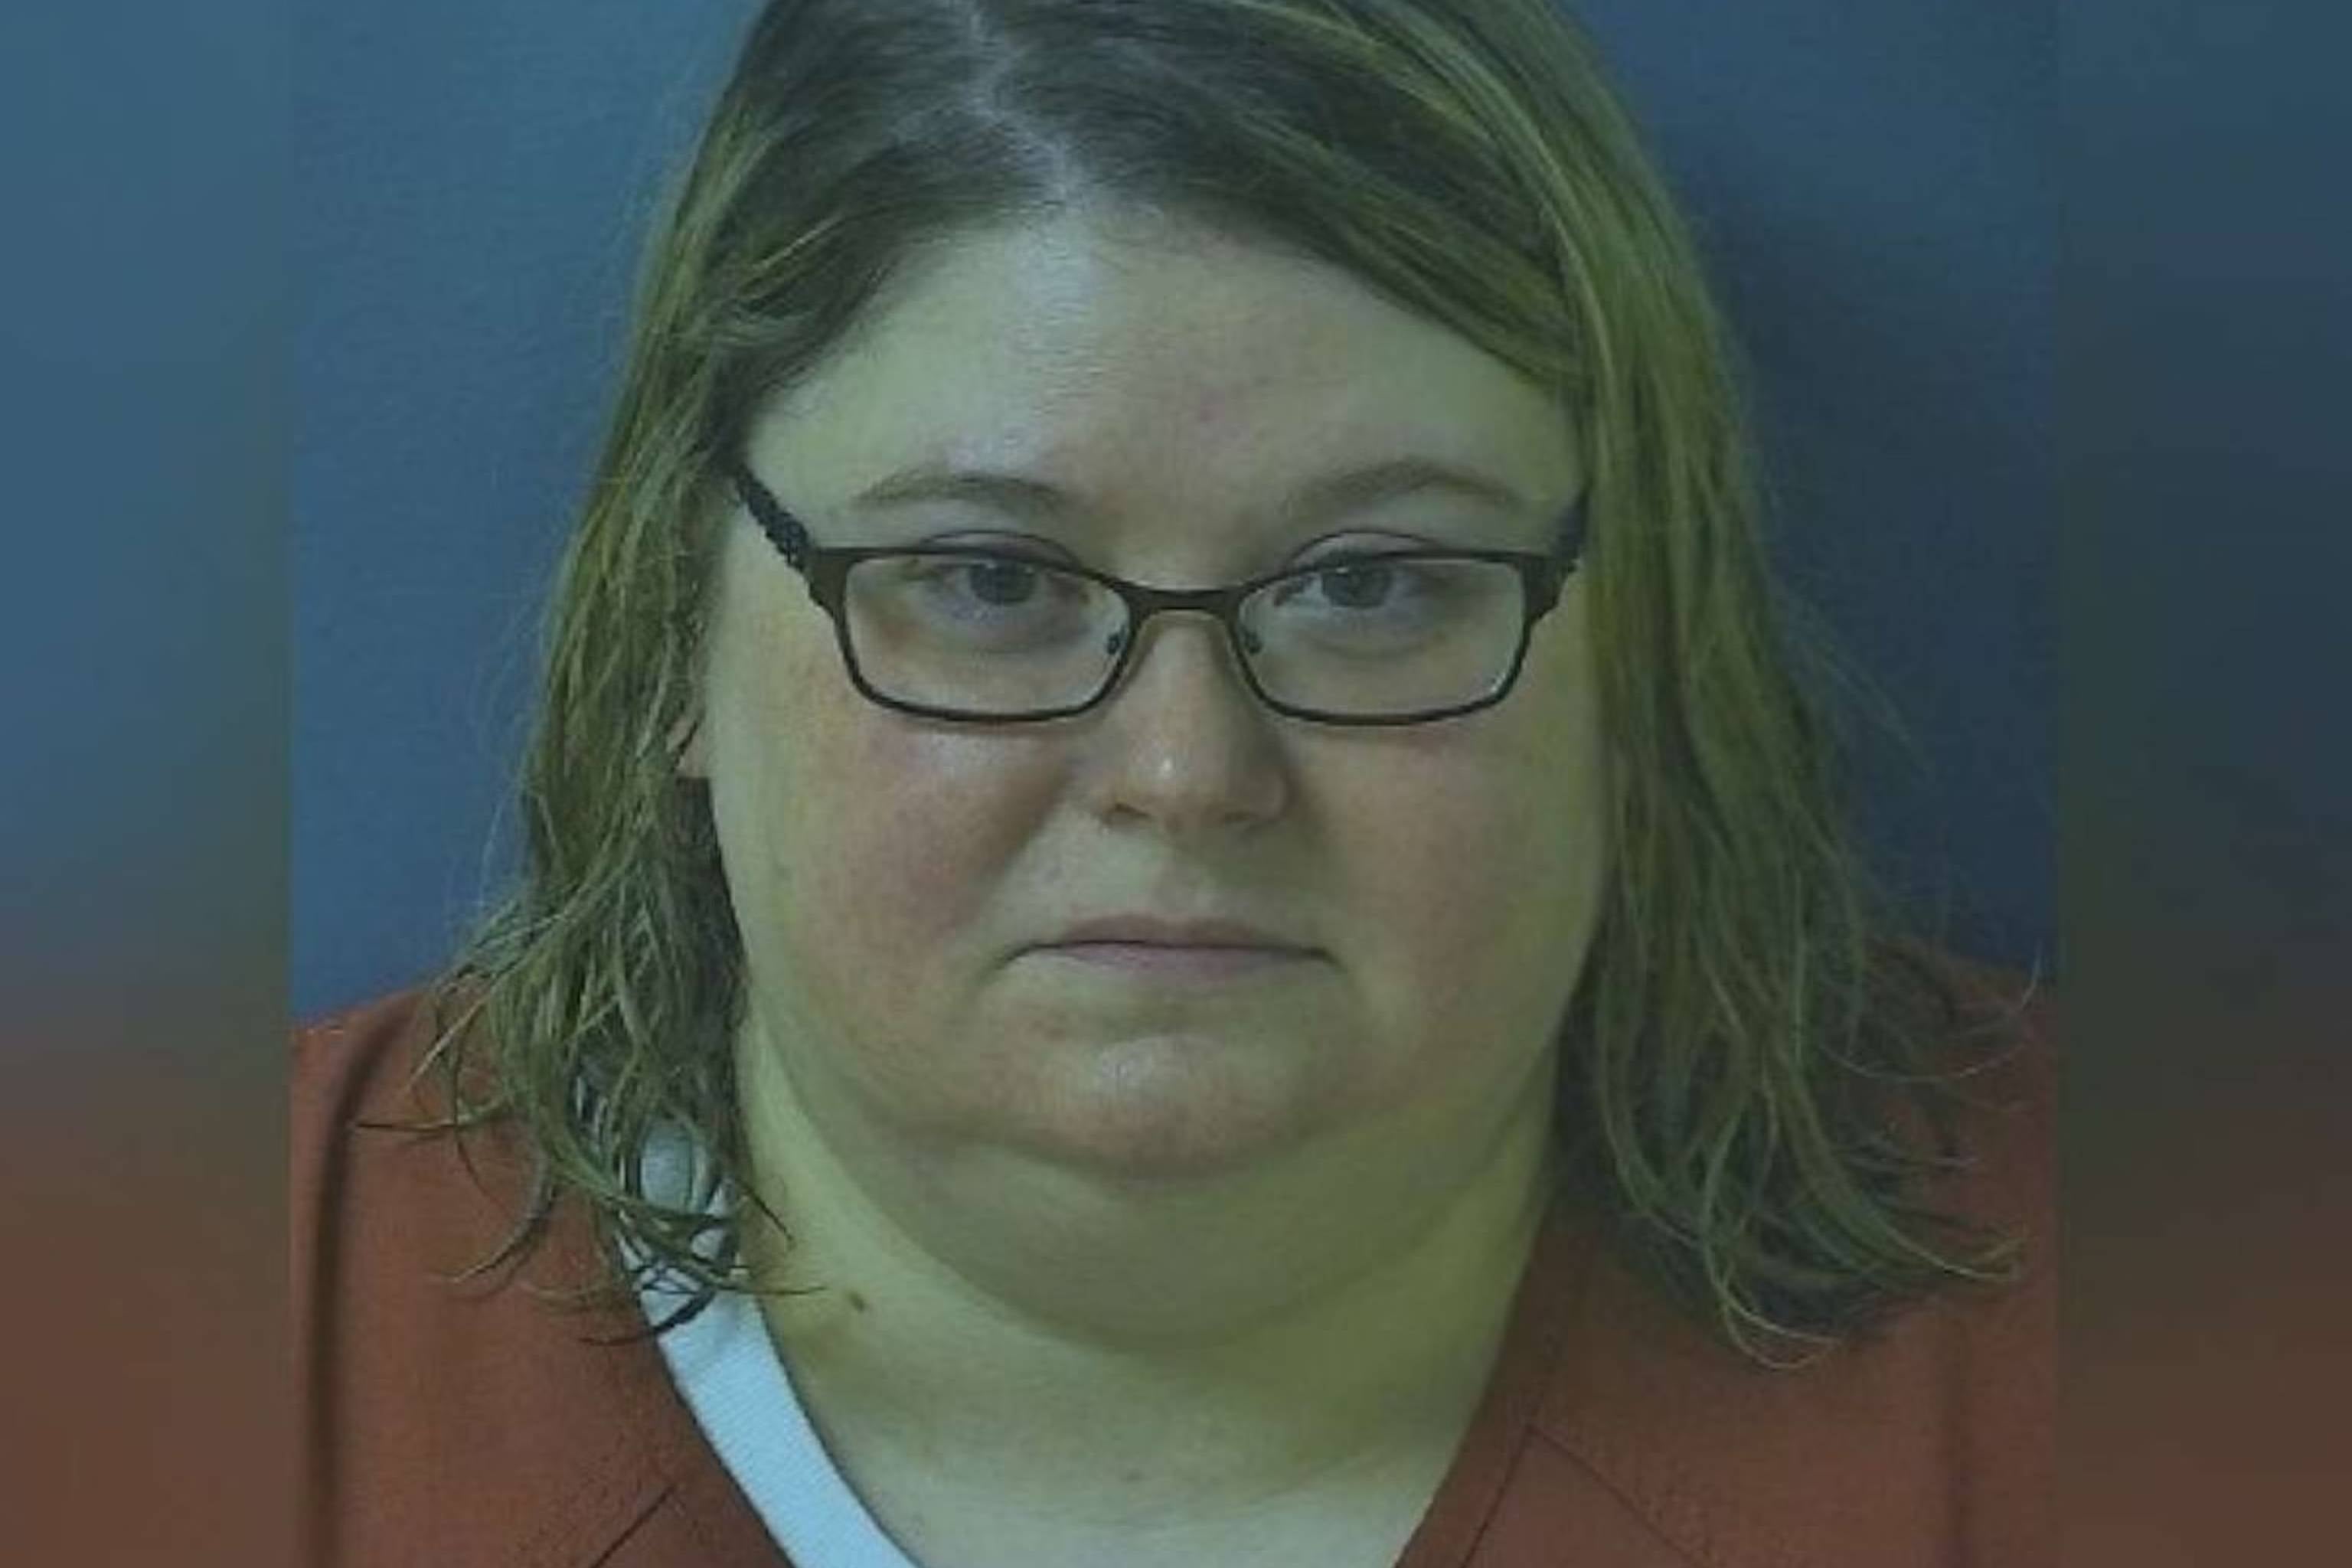 Former nurse Heather Pressdee accused of murdering patients with insulin injections